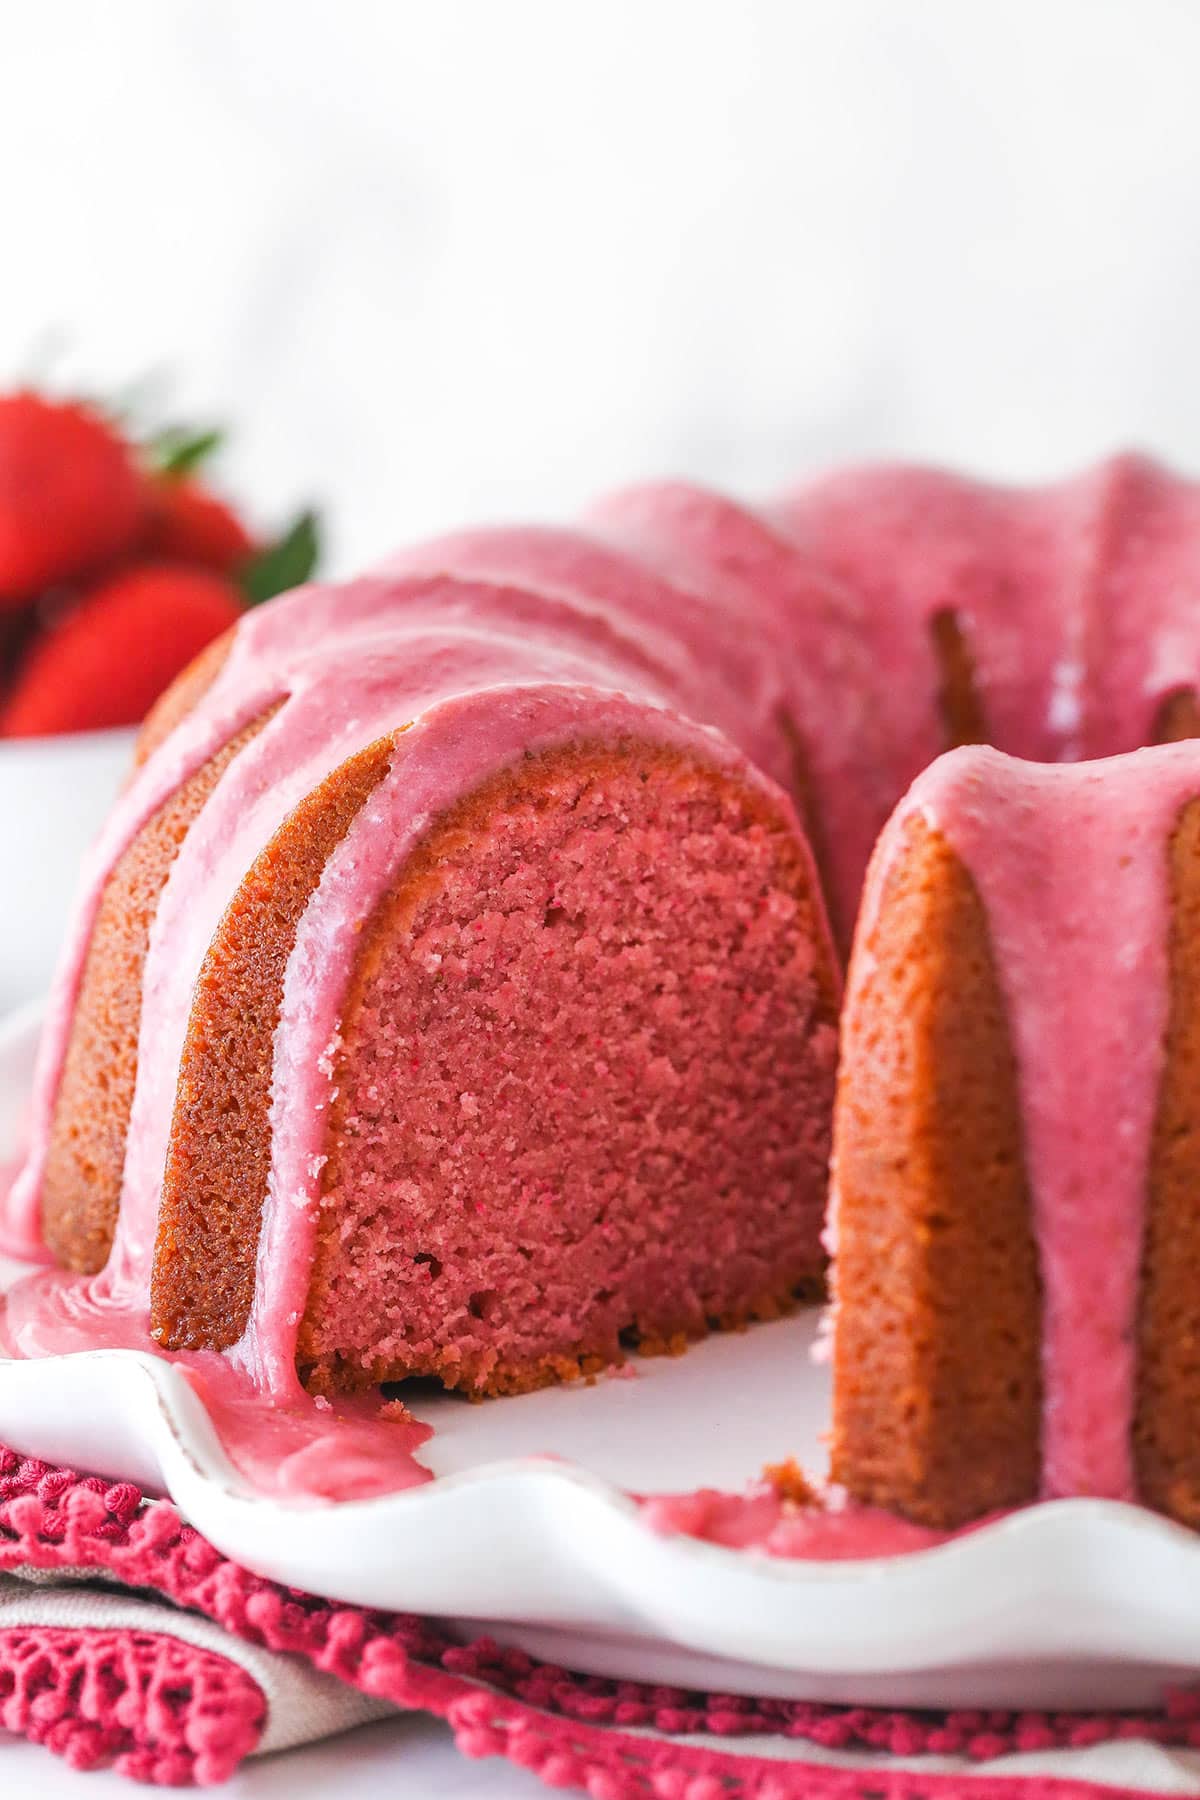 Strawberry Icecream Cake (2 pound) – Sialkot Sweets And Bakers